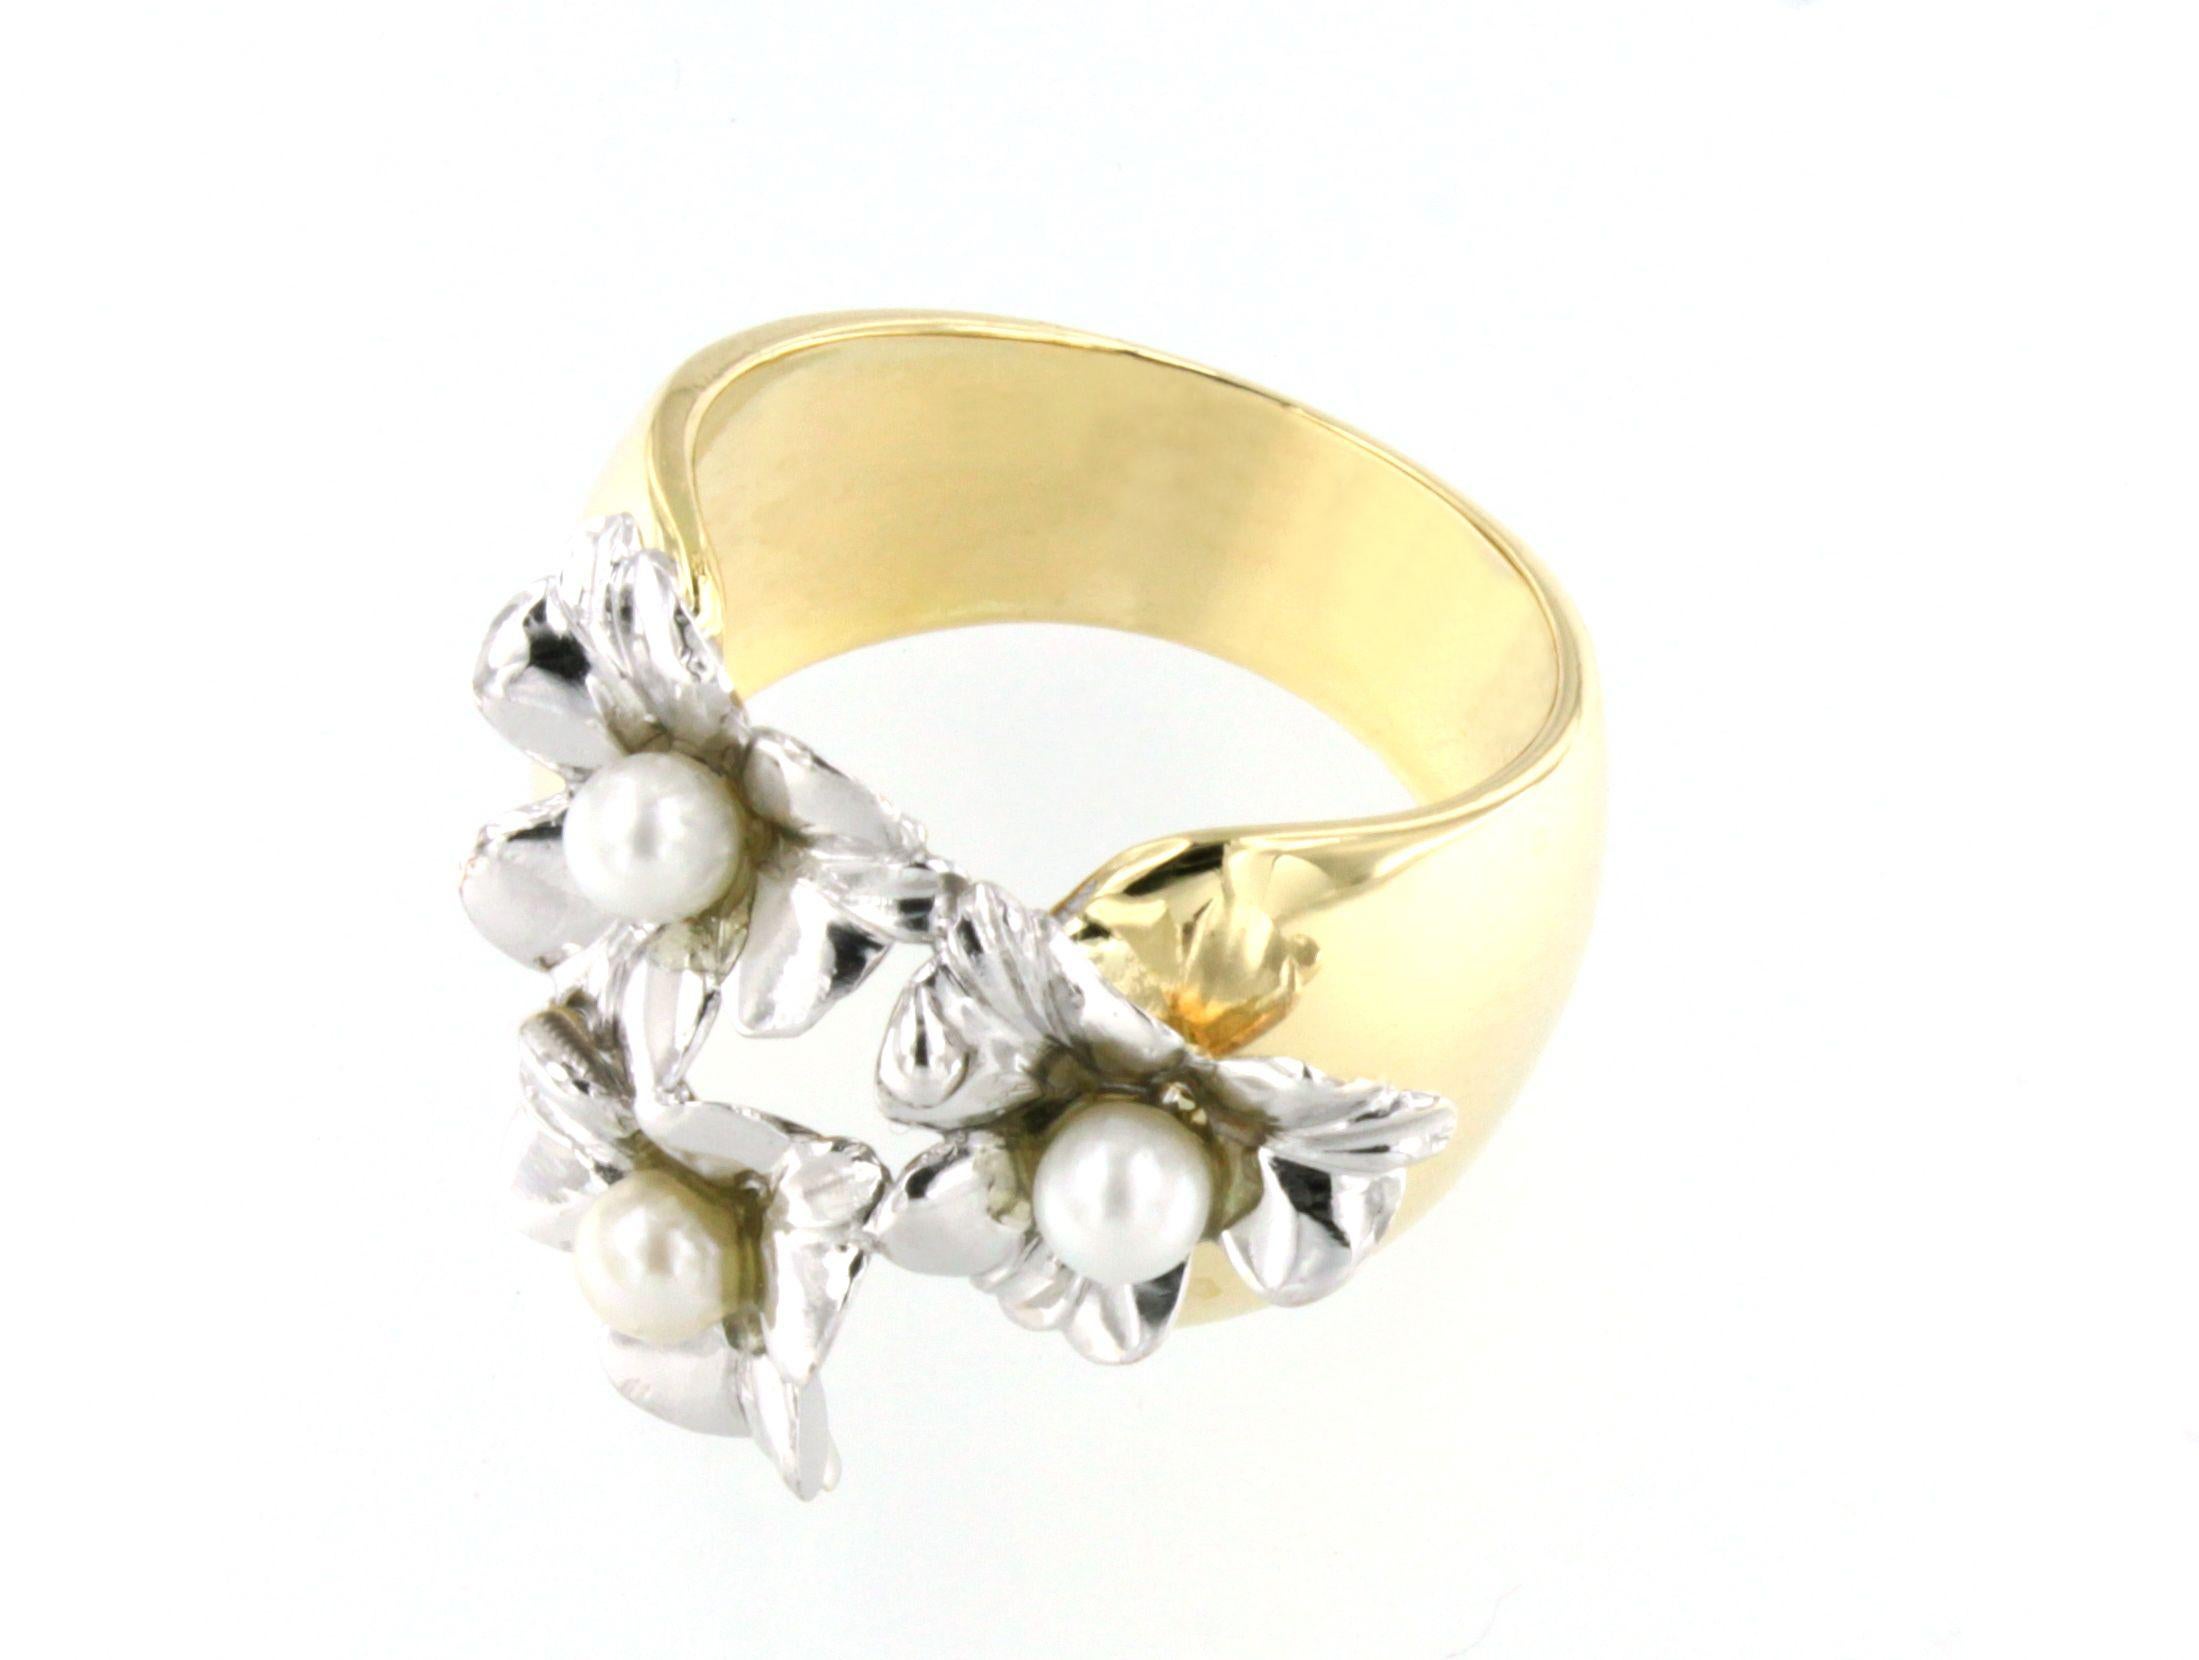 Fashion Ring in 18k white and gold with natural white Pearls, handemade in Italy by Stanoppi Jewellery since 1948
All our jewels are produced only in our laboratory by expert goldsmiths
Size of ring:  EU 15  - 55   - 7,5 USA  g.13.60
(Possibility to